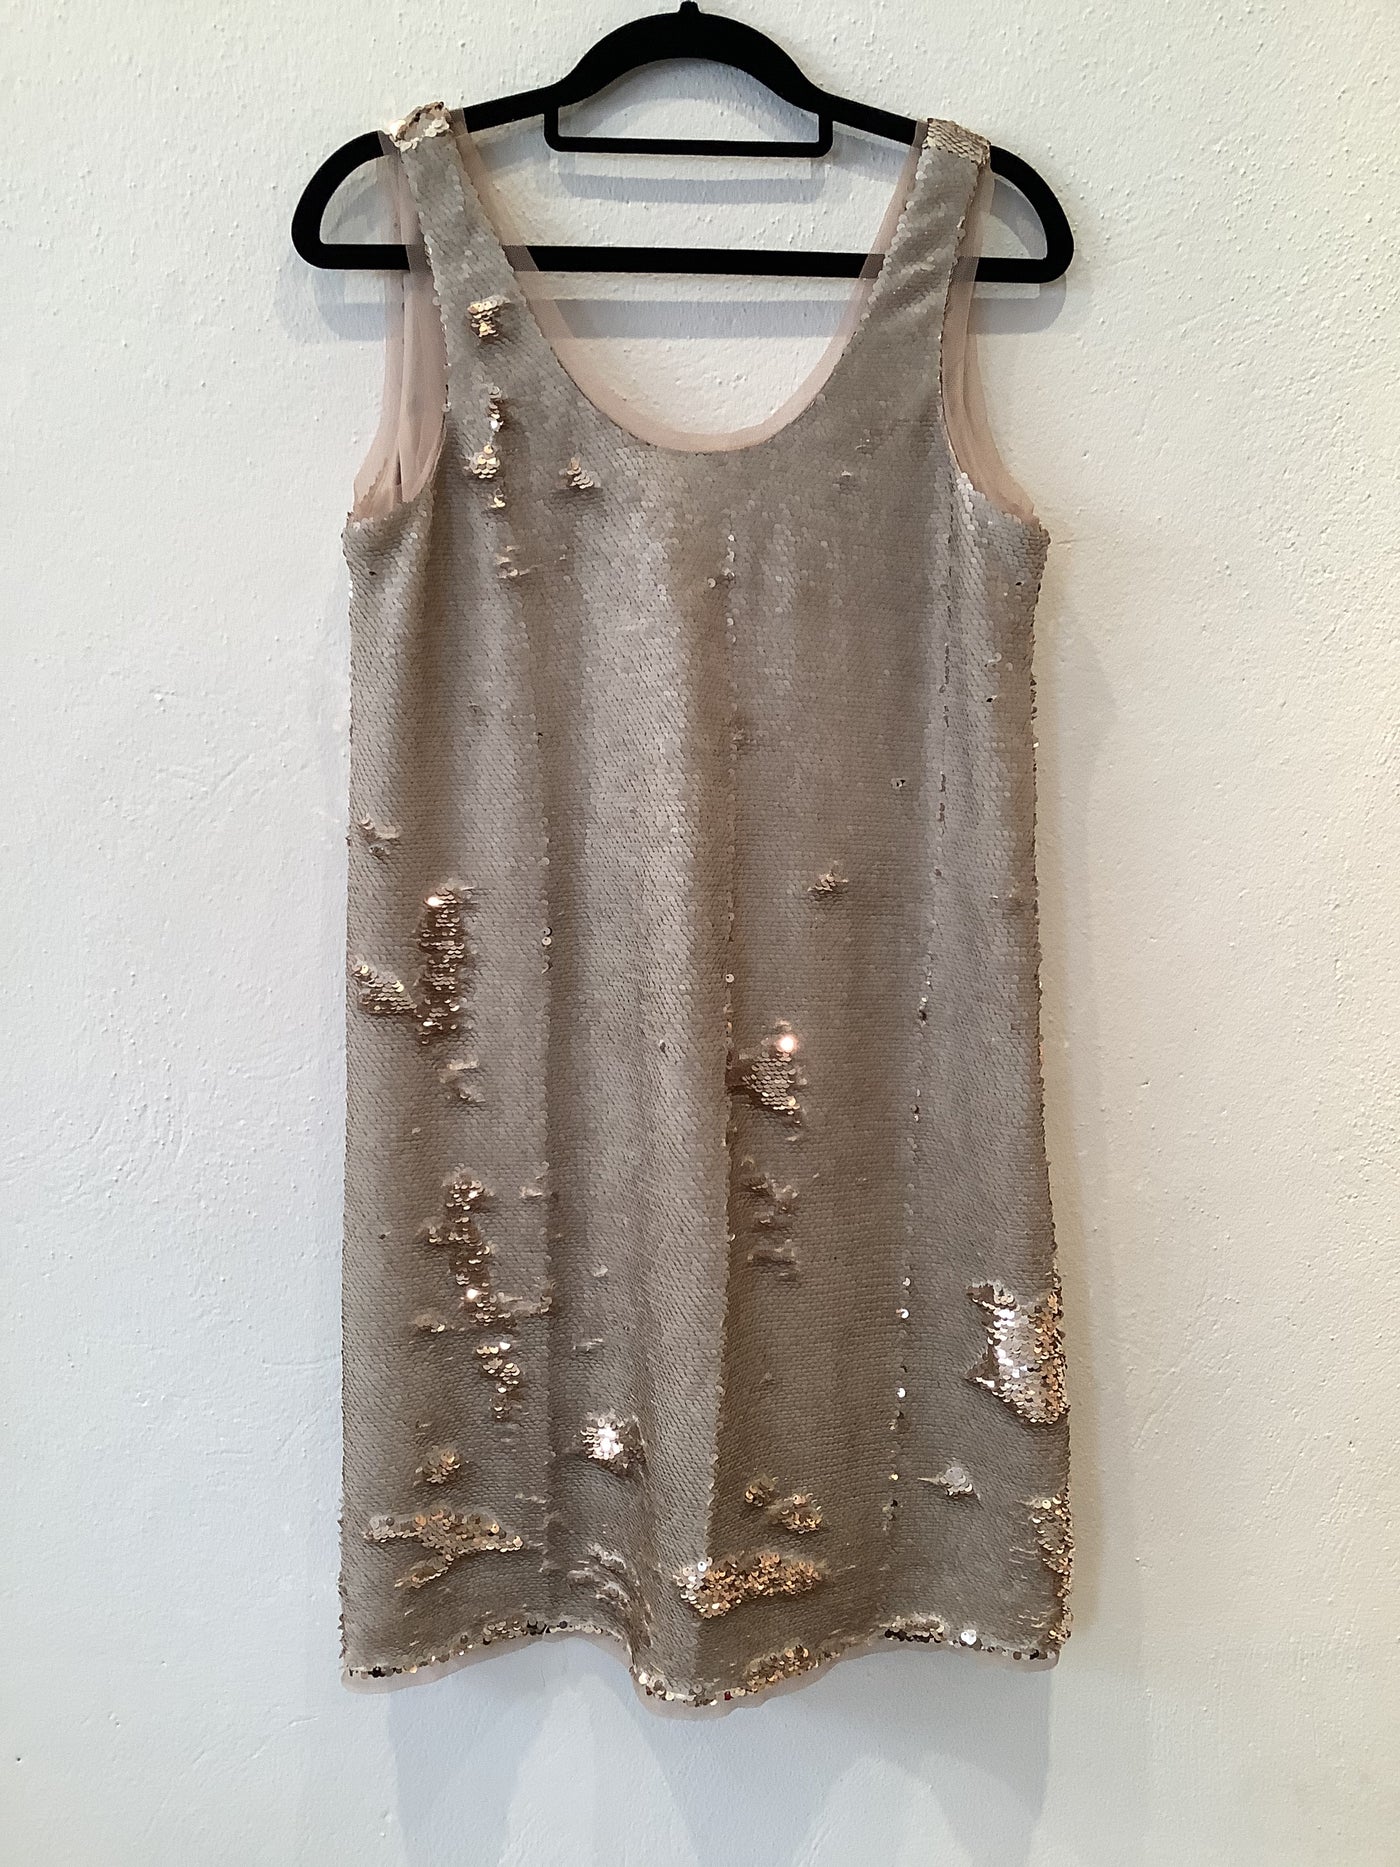 Zara Gold Sequined Dress Size S